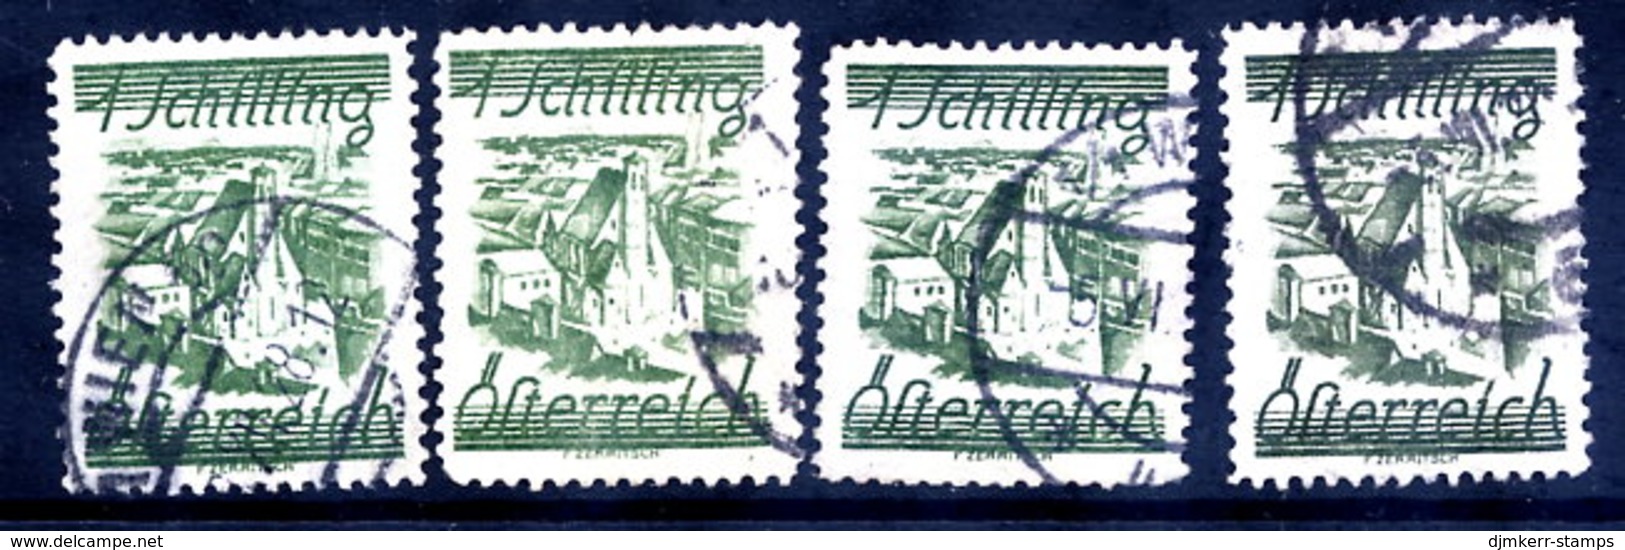 AUSTRIA 1925 Definitive 1 S. All Four Catalogued  Shades Used.  ANK 466a-d Cat. €65 - Used Stamps